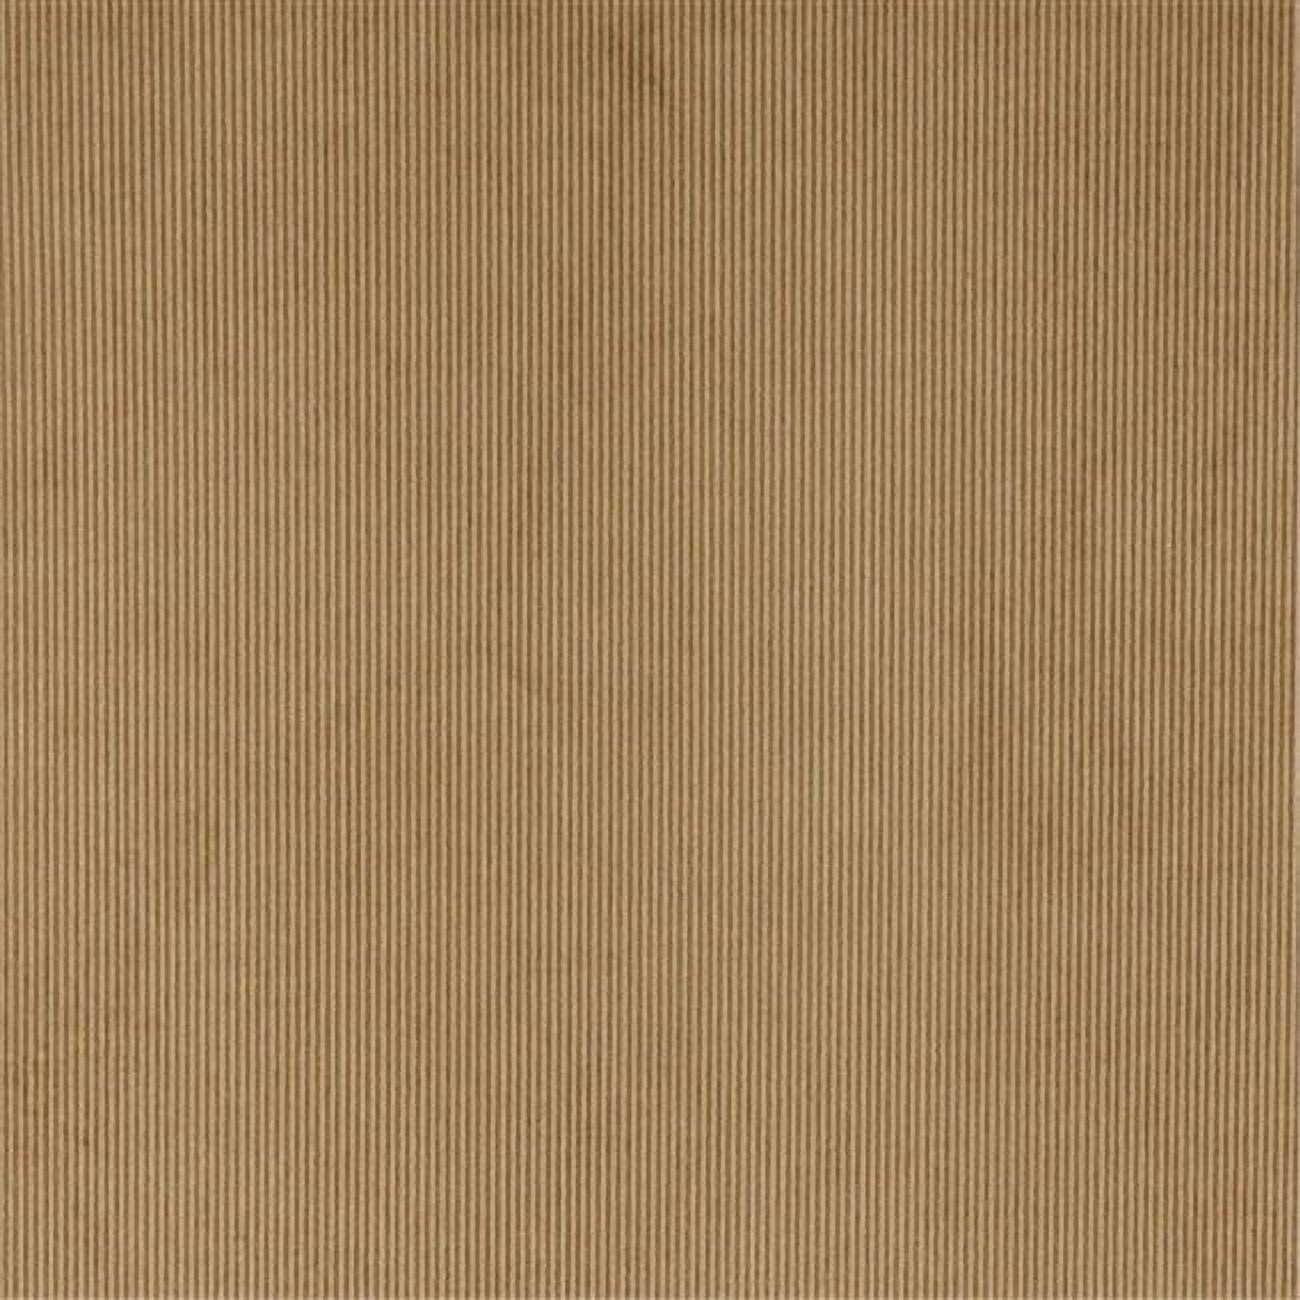 Mink Brown Corduroy Upholstery Fabric, 54 Wide